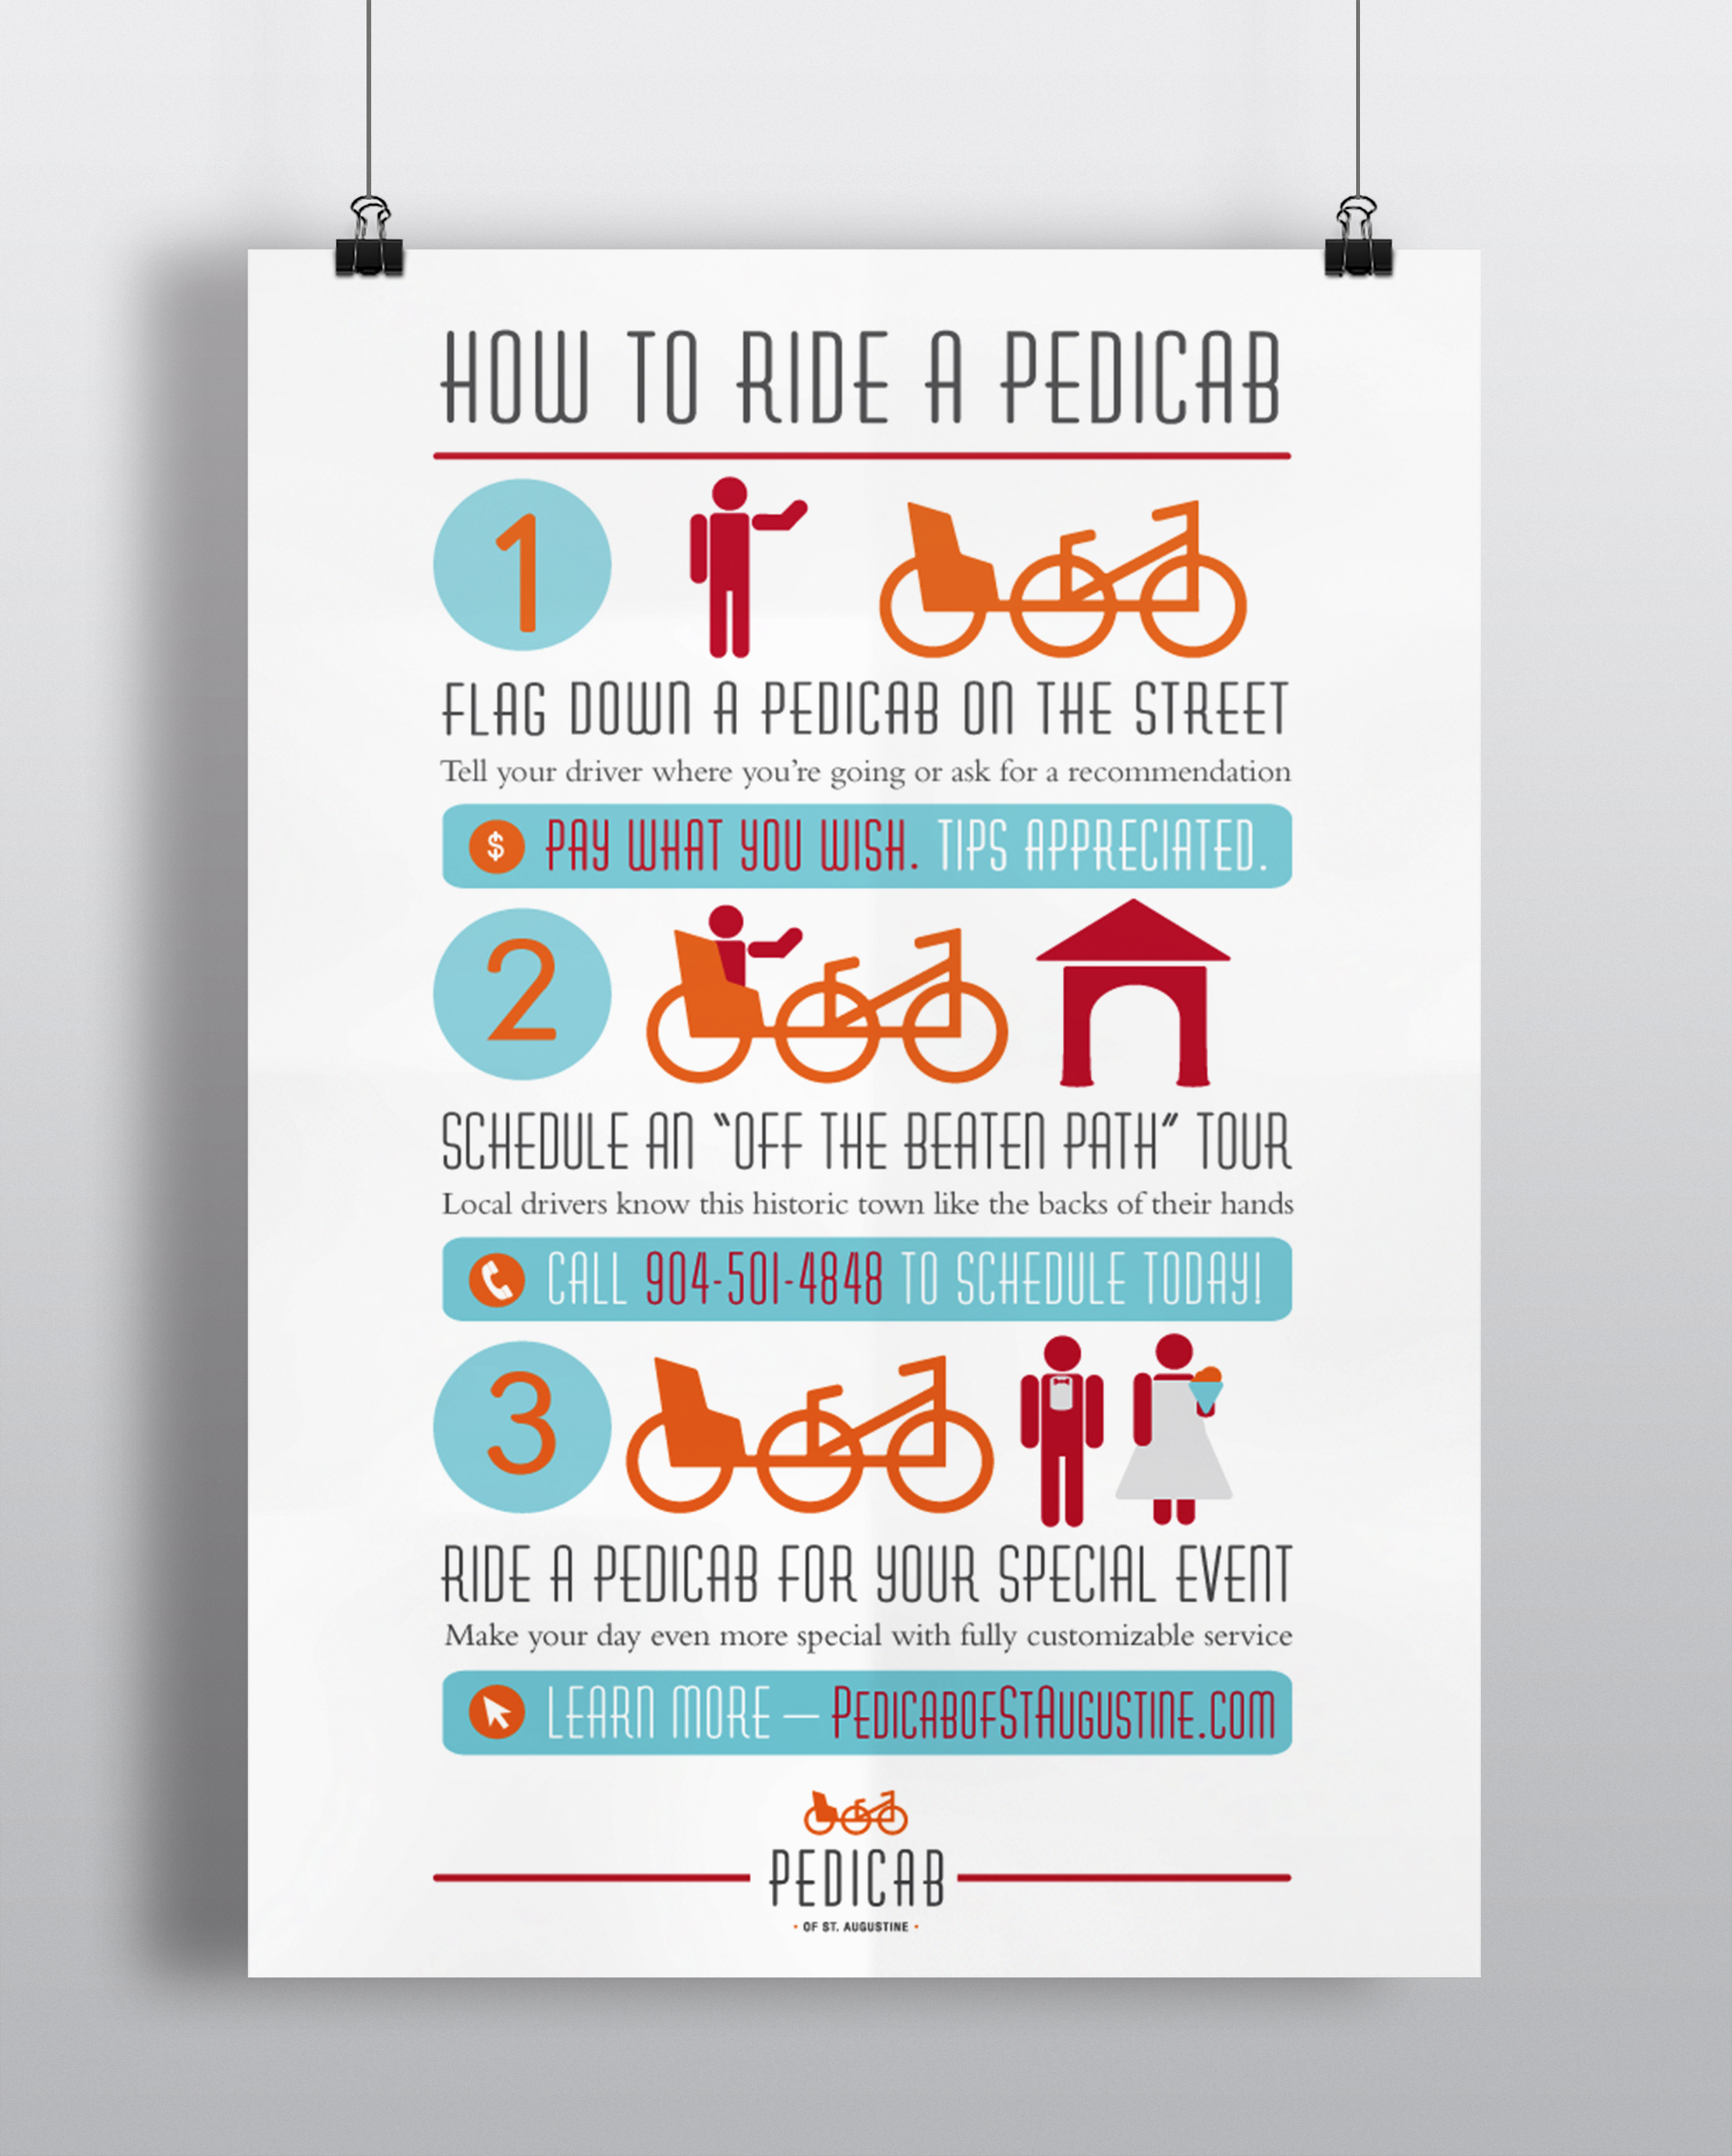 Pedicab of St. Augustine Brand Poster Designed by Just Make Things